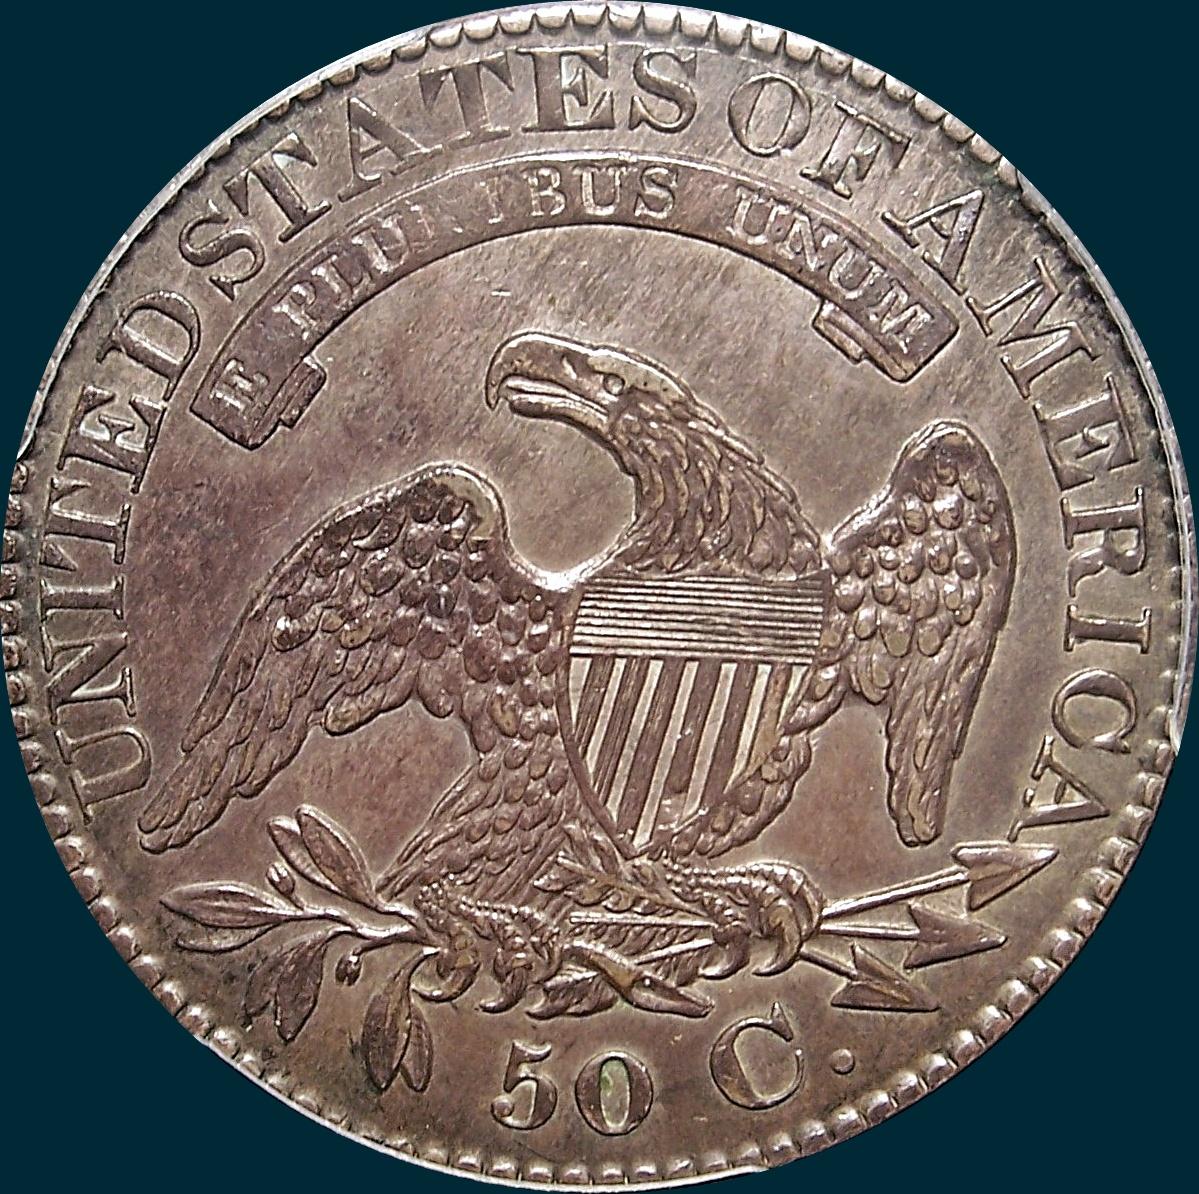 1828, O-109, Square Base 2, Large 8's, Capped Bust Half Dollar